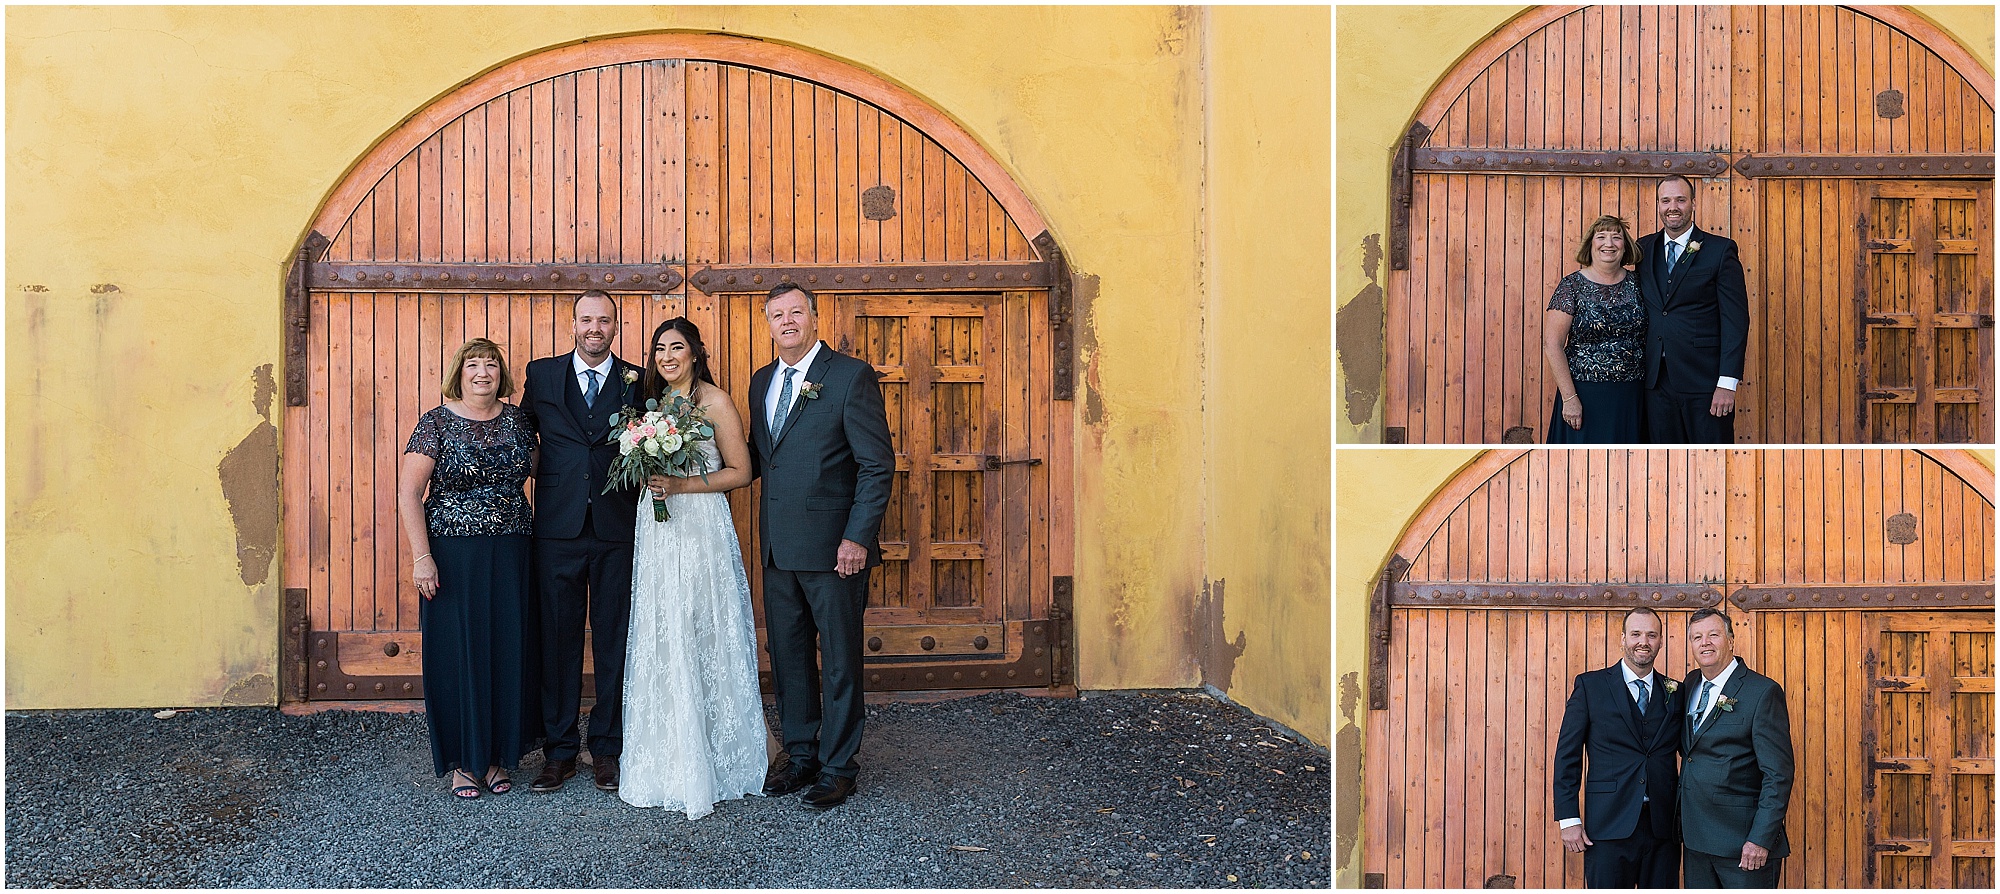 The groom and his parents pose for formal family portraits after this beautiful Tuscan inspired Central Oregon wedding. | Erica Swantek Photography